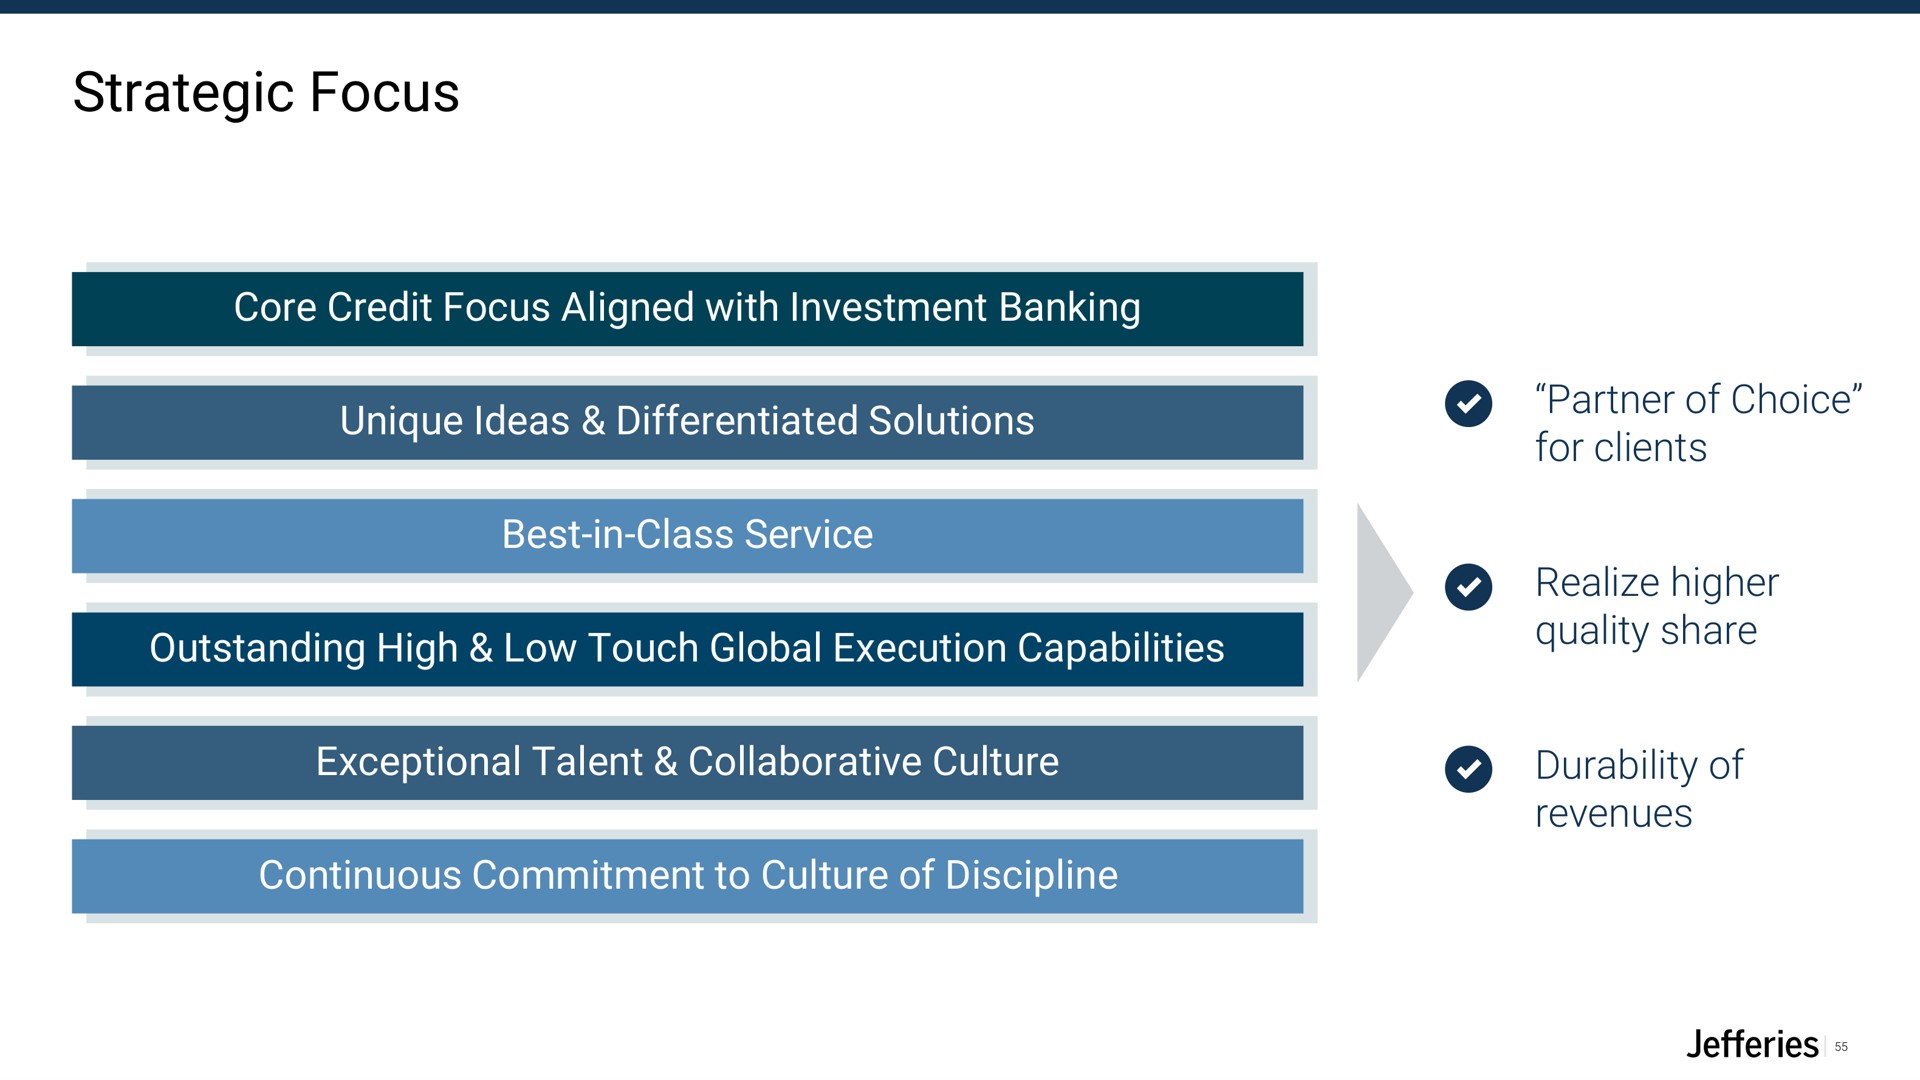 strategic focus core credit focus aligned with investment banking unique ideas differentiated solutions best in class service outstanding high low touch global execution capabilities exceptional talent collaborative culture continuous commitment to culture of discipline partner of choice for clients realize higher quality share durability of revenues rerun | Jefferies Financial Group